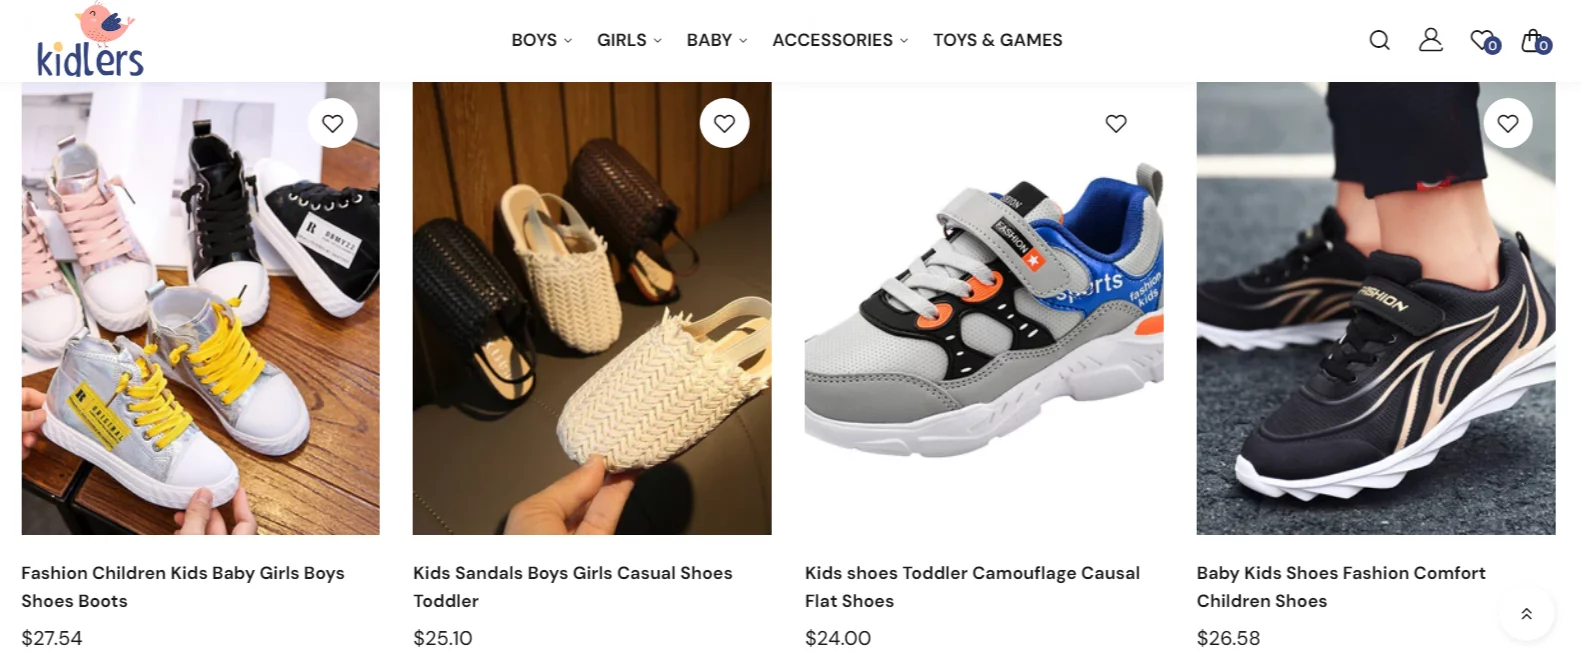 What are some winning products in the Turnkey Shopify Kidswear Stores?